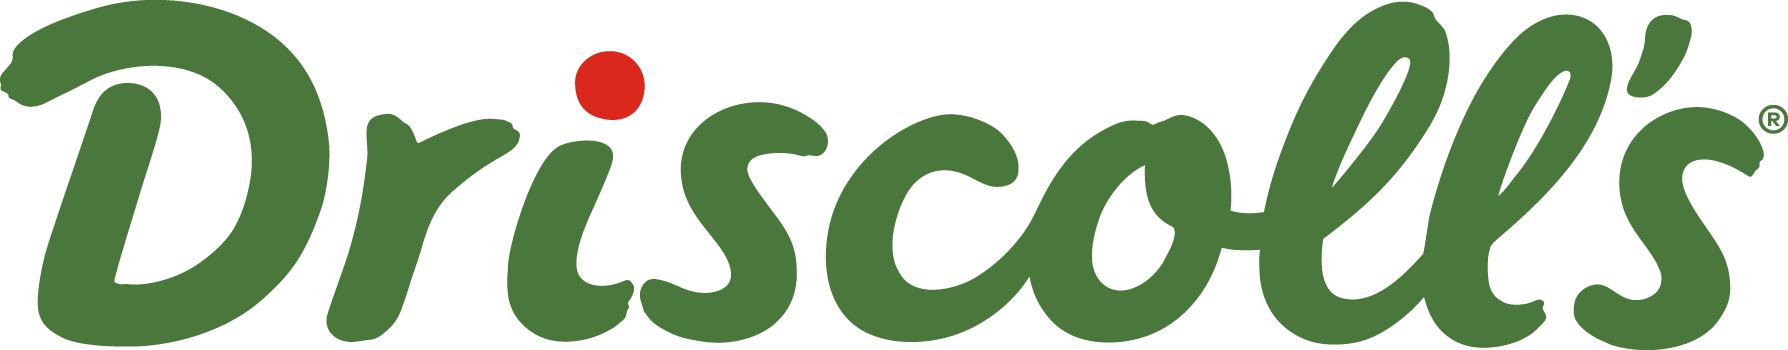 The Driscoll's logo in a green cursive font with a red accent.